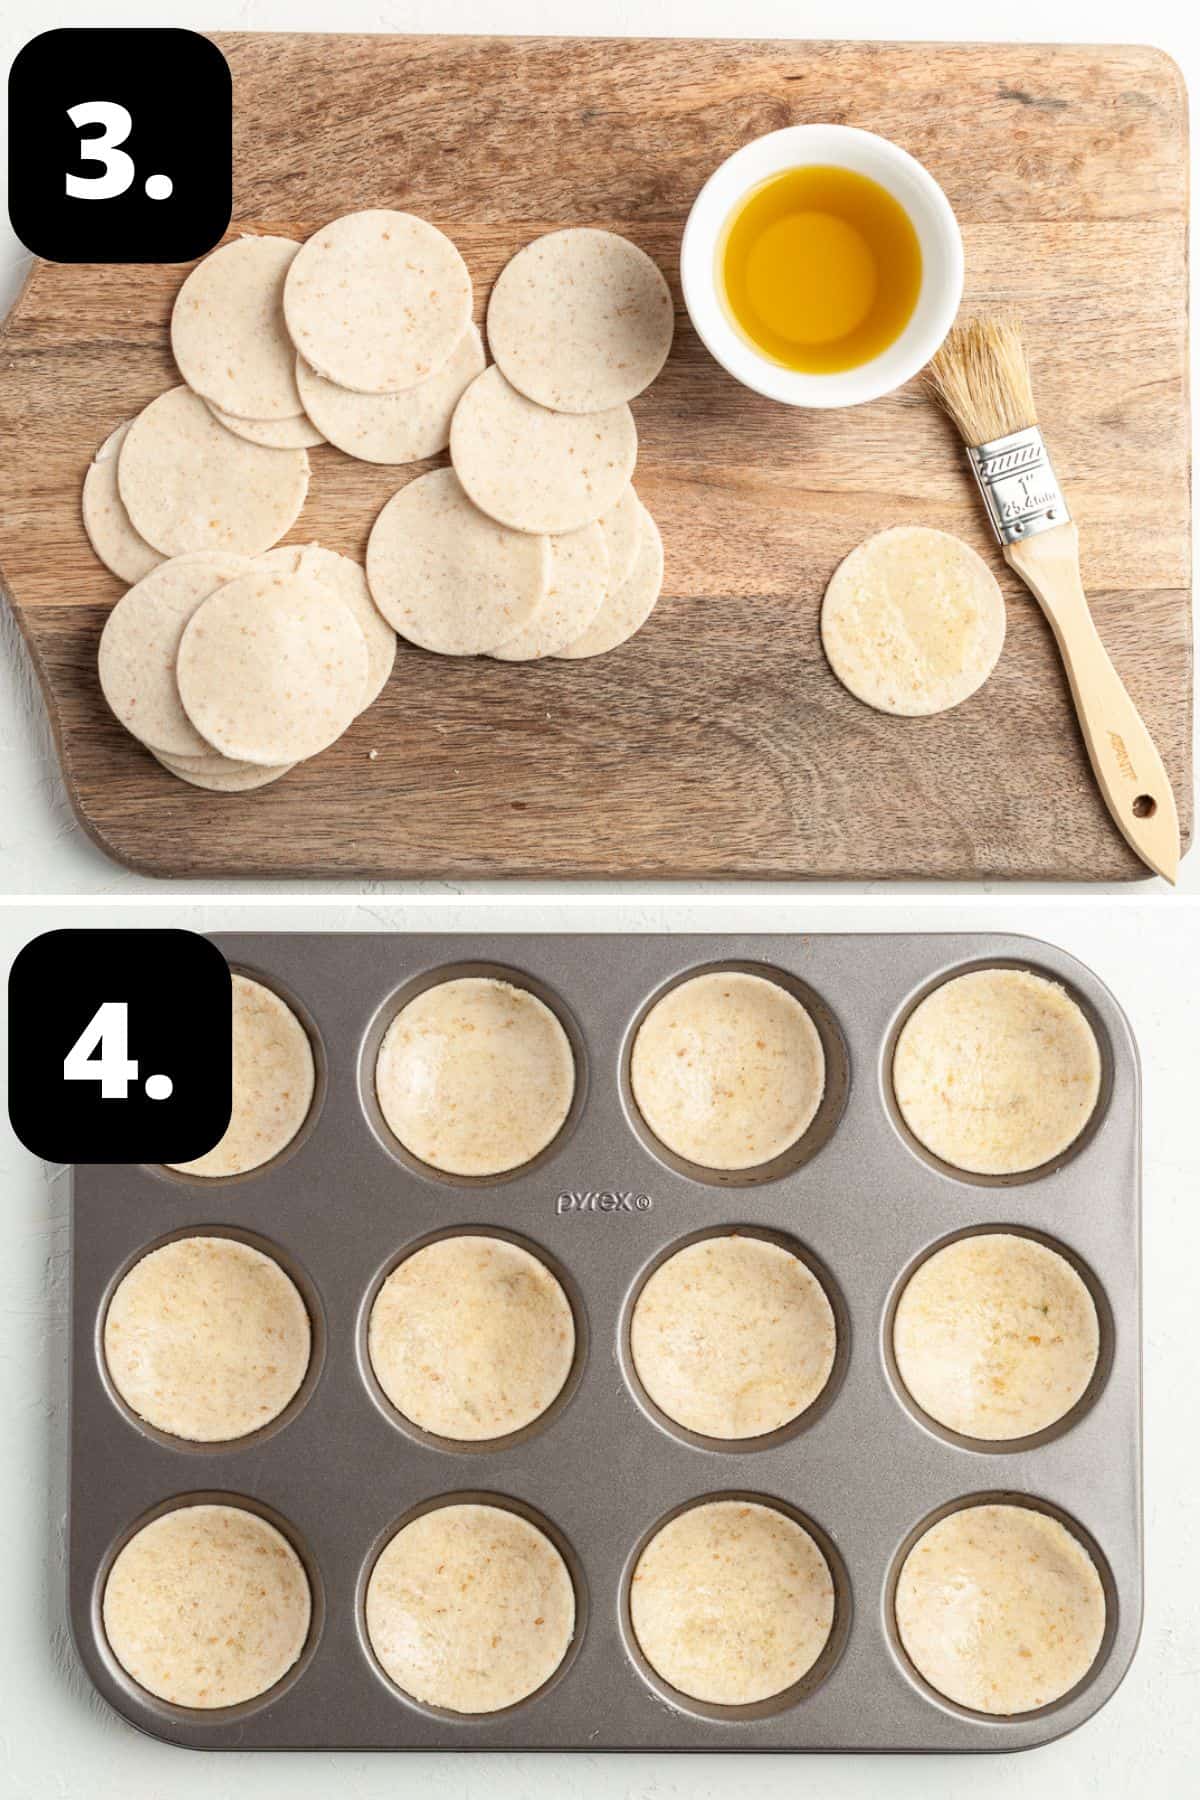 Steps 3-4 of preparing this recipe - brushing the bread rounds with oil and putting them into the patty pan tins.